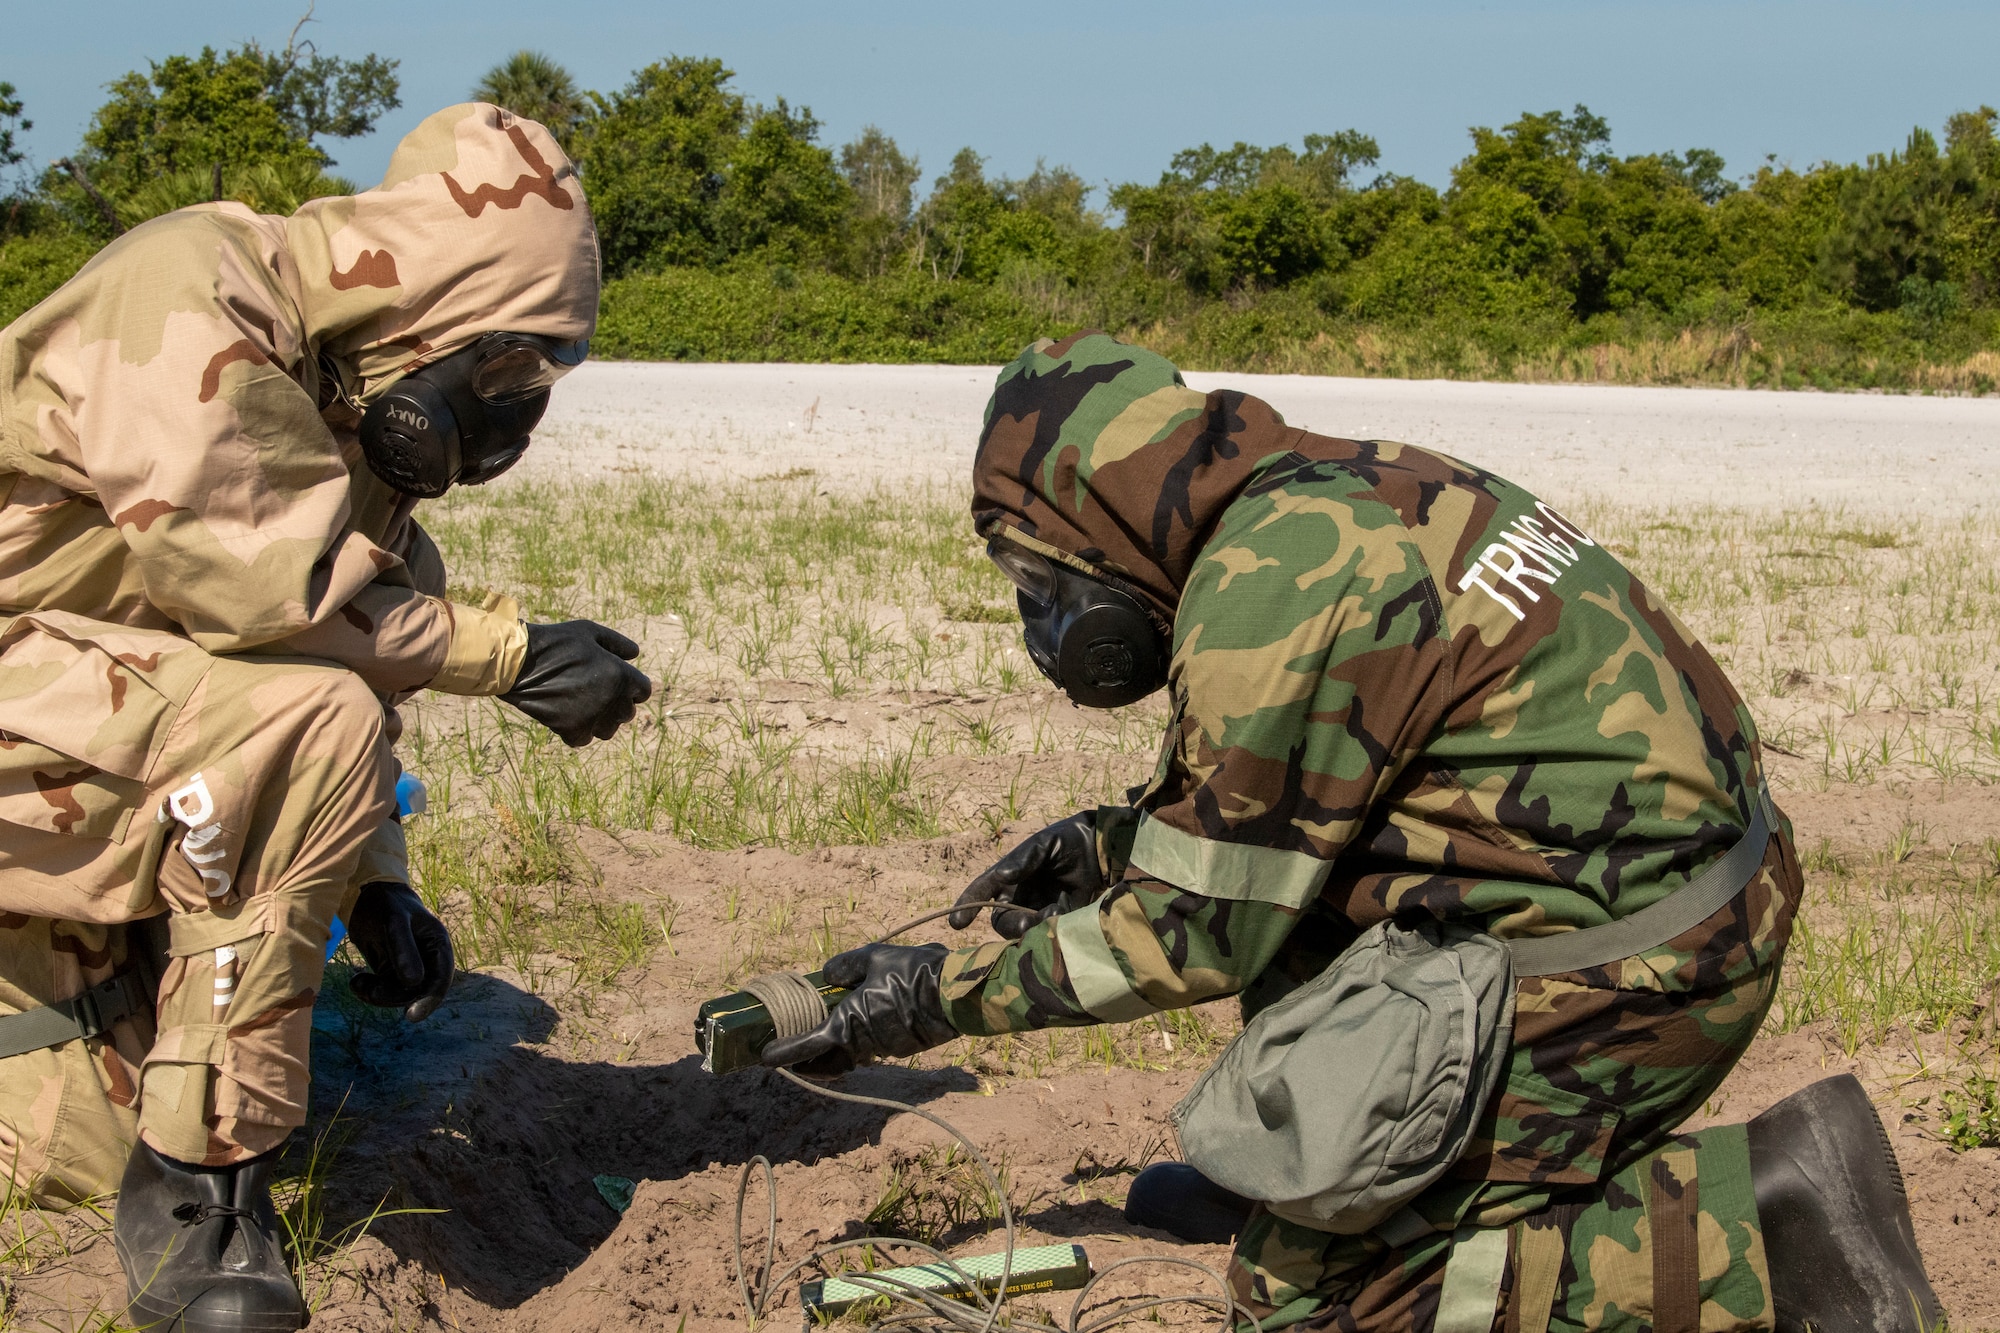 Airmen from the 6th Civil Engineer Squadron Explosive Ordnance Disposal (EOD) Flight set up C-4 charges at MacDill Air Force Base, Fla., April 29, 2021.